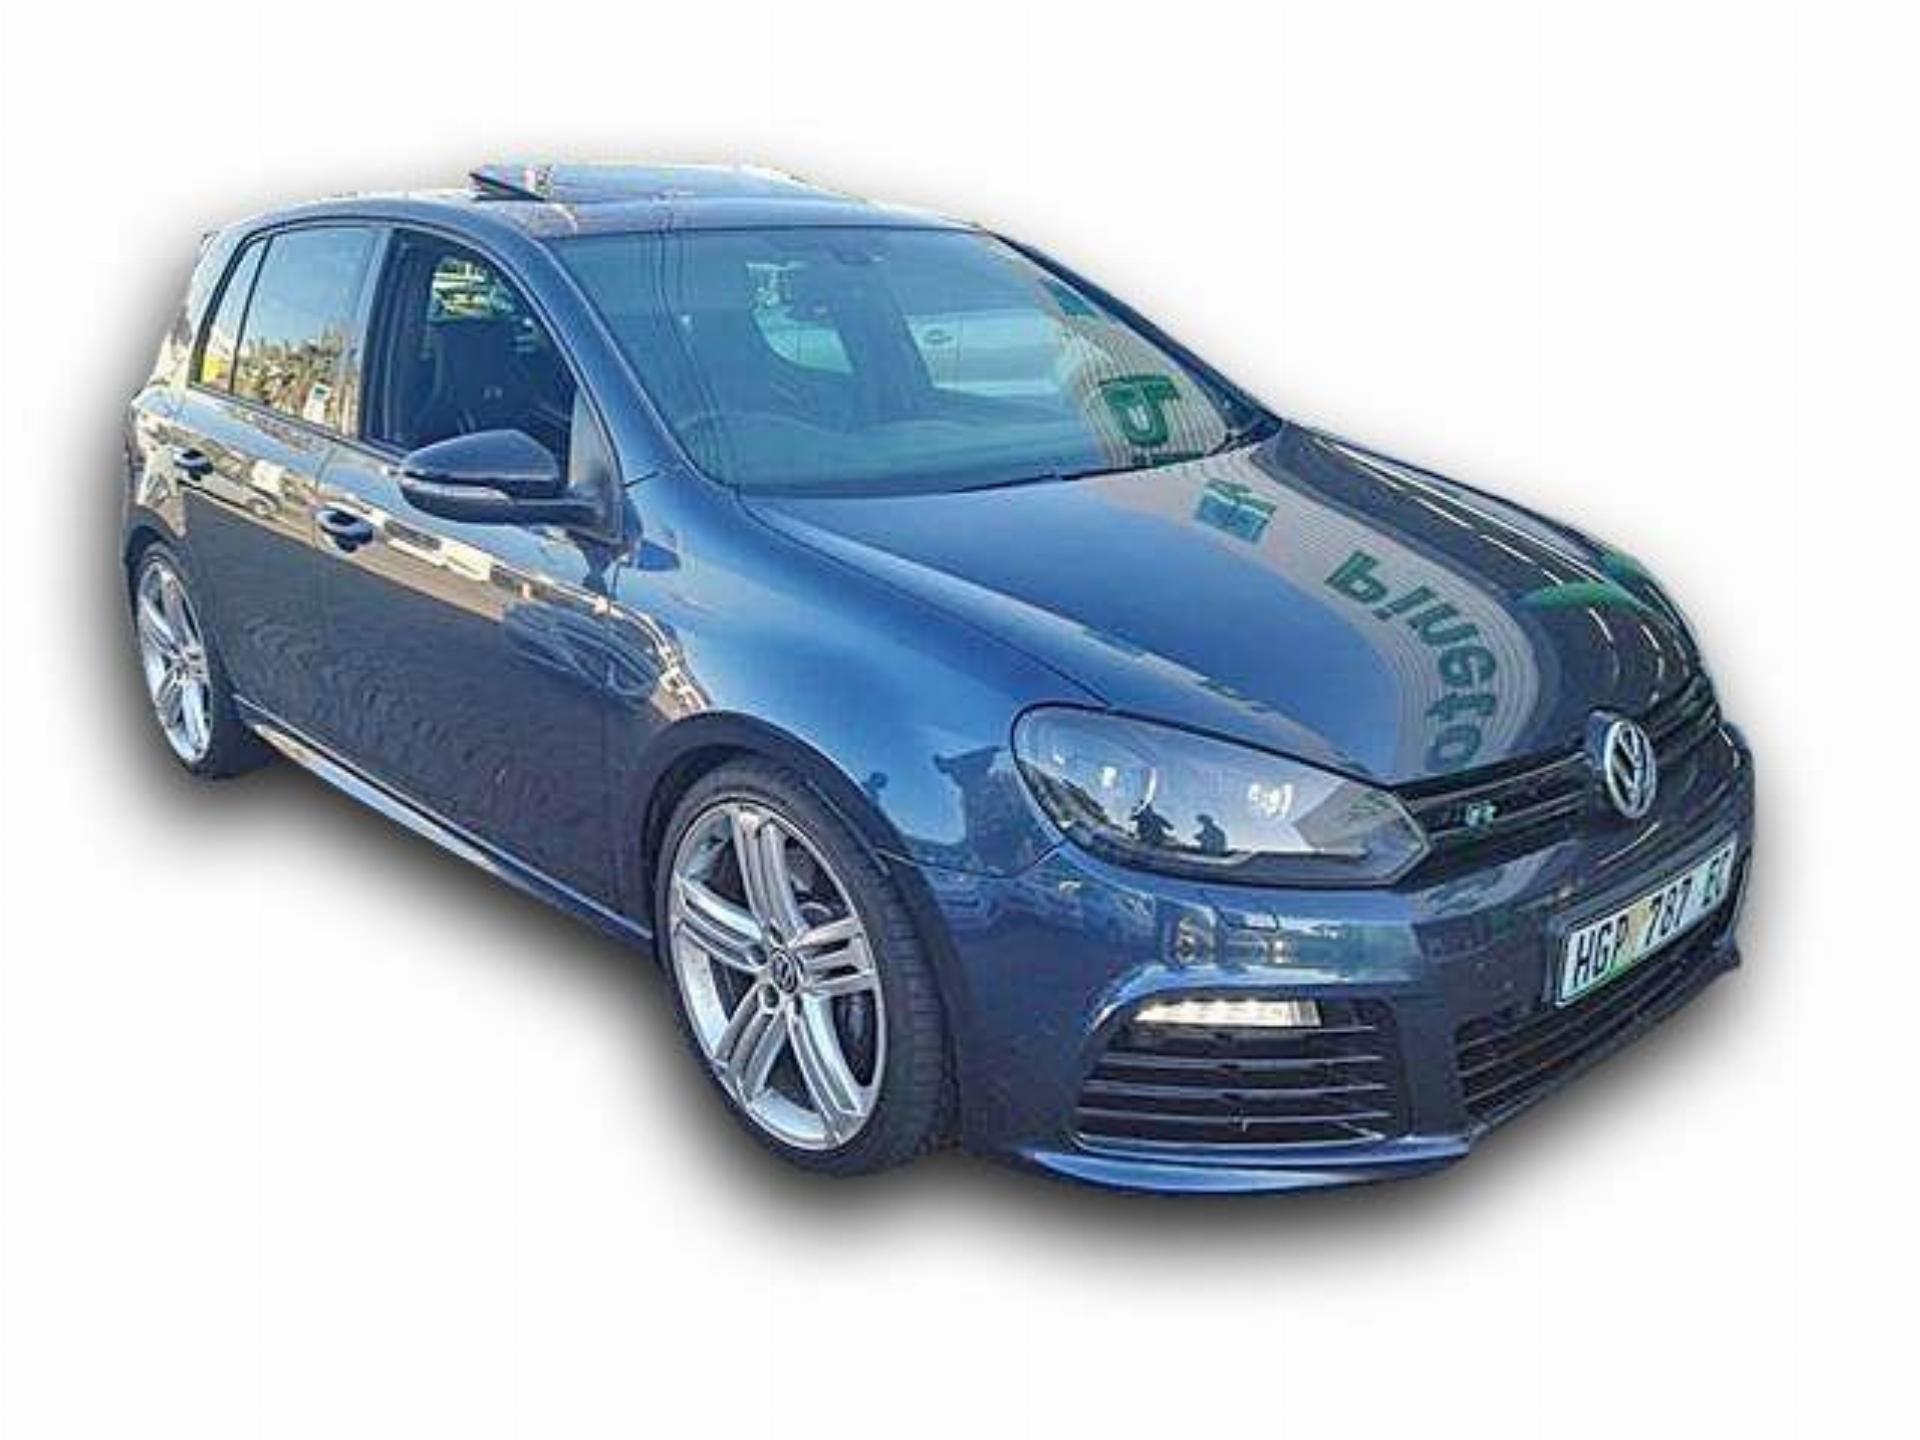 Used Volkswagen Golf 6 R 2012 on auction PV1021559